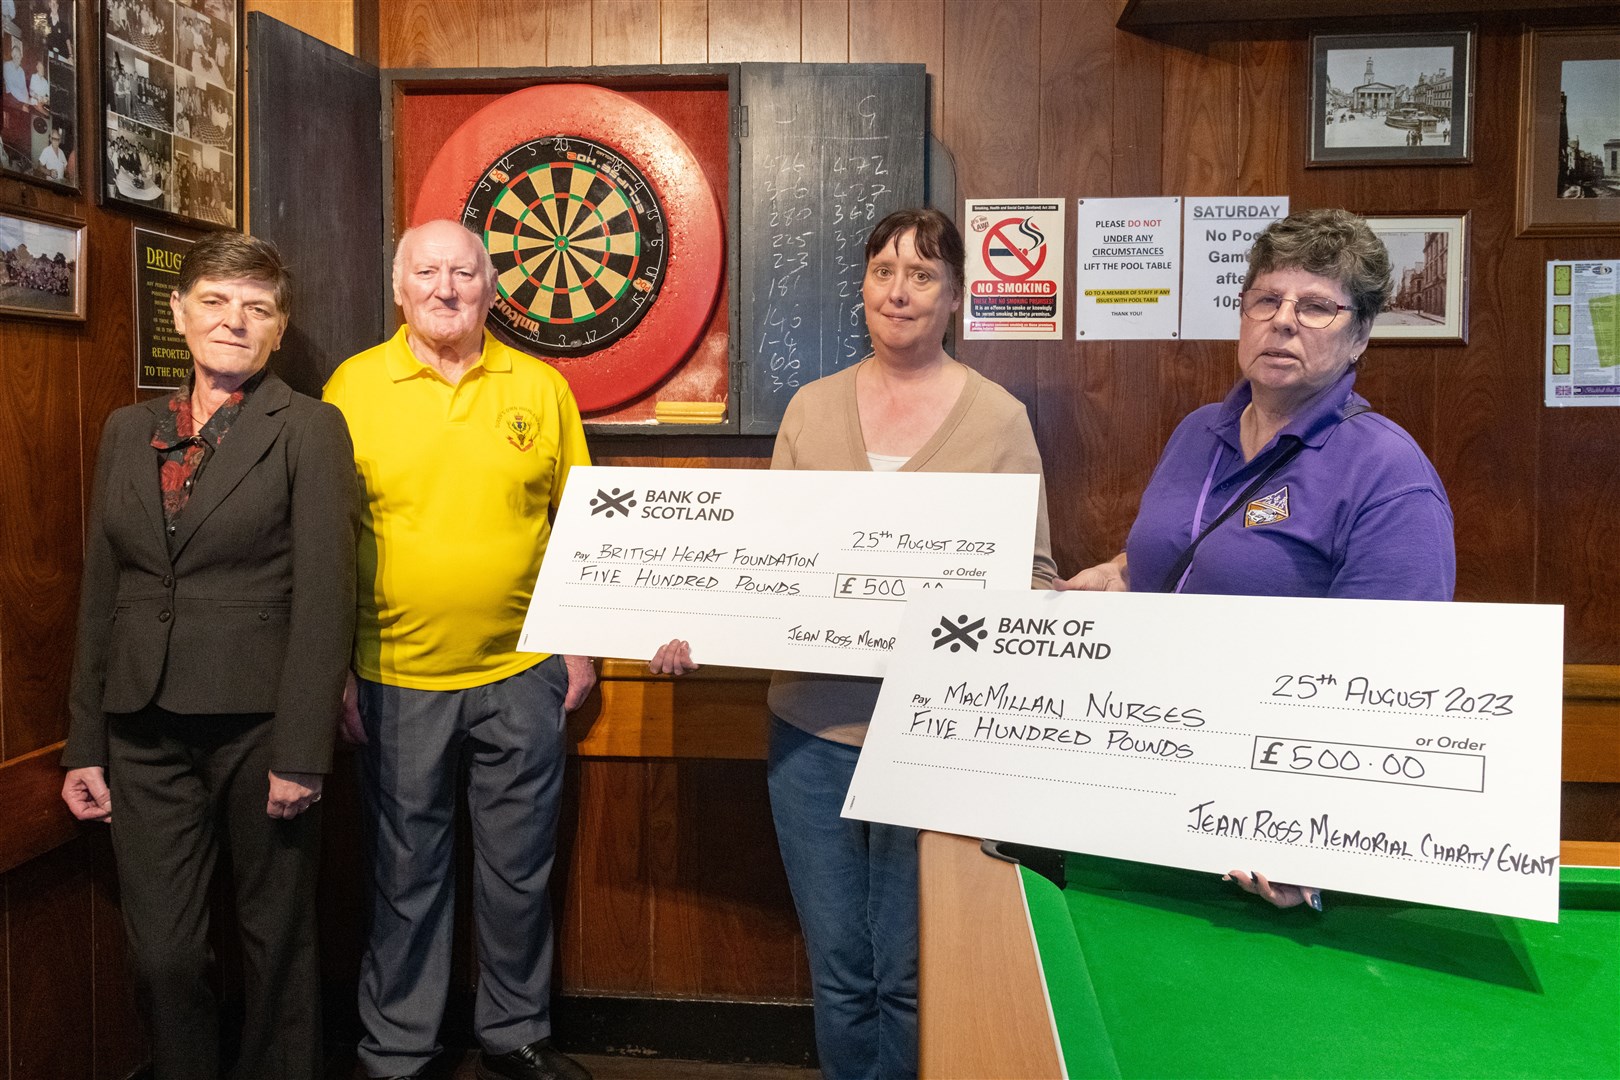 From left: Patricia Ross and Bill Ross handing over cheques for £500 to Marcelle Pratt (assistant manager at British Heart Foundation, Elgin) and Susan Lissamer (contract driver at C&R Taxi's) for Macmillan from the Jean Ross Memorial Charity Event...Picture: Beth Taylor.